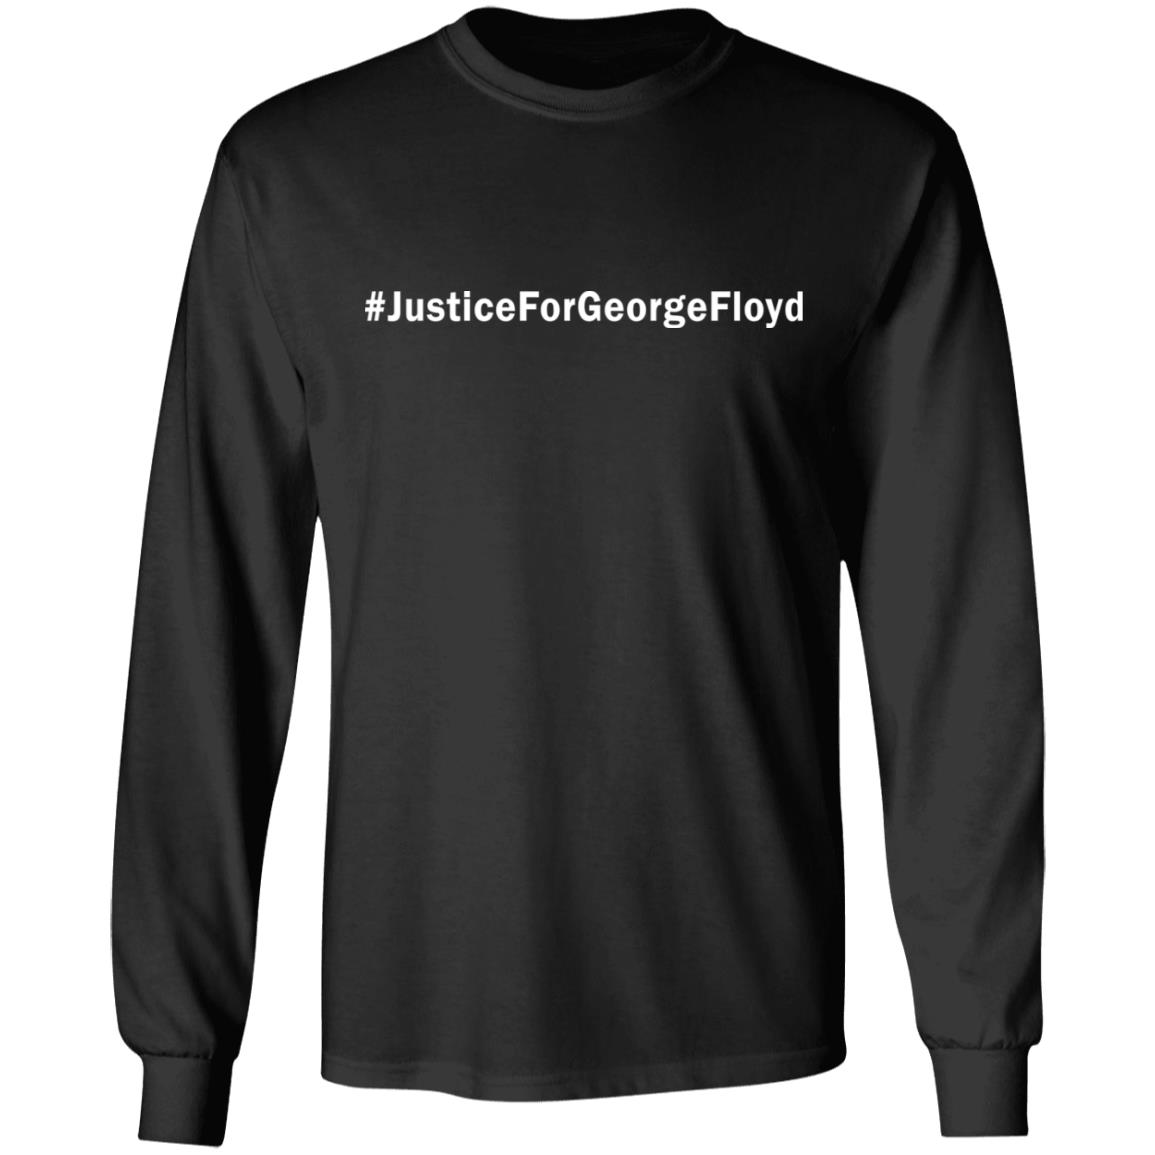 Justice For George Floyd shirt - Rockatee